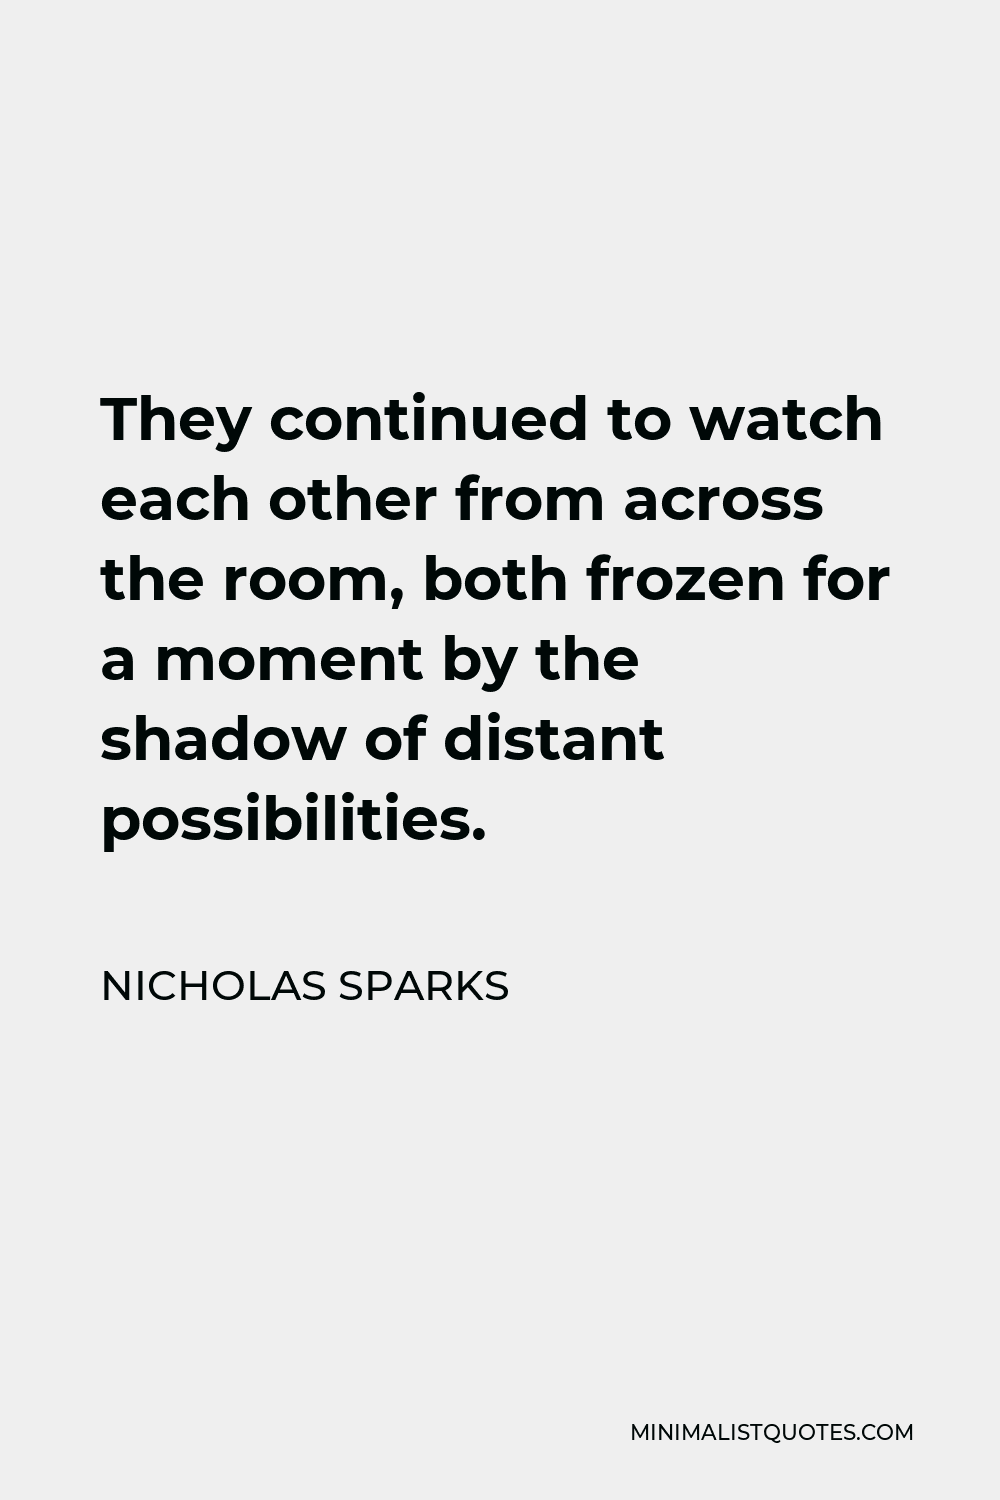 Nicholas Sparks Quote - They continued to watch each other from across the room, both frozen for a moment by the shadow of distant possibilities.